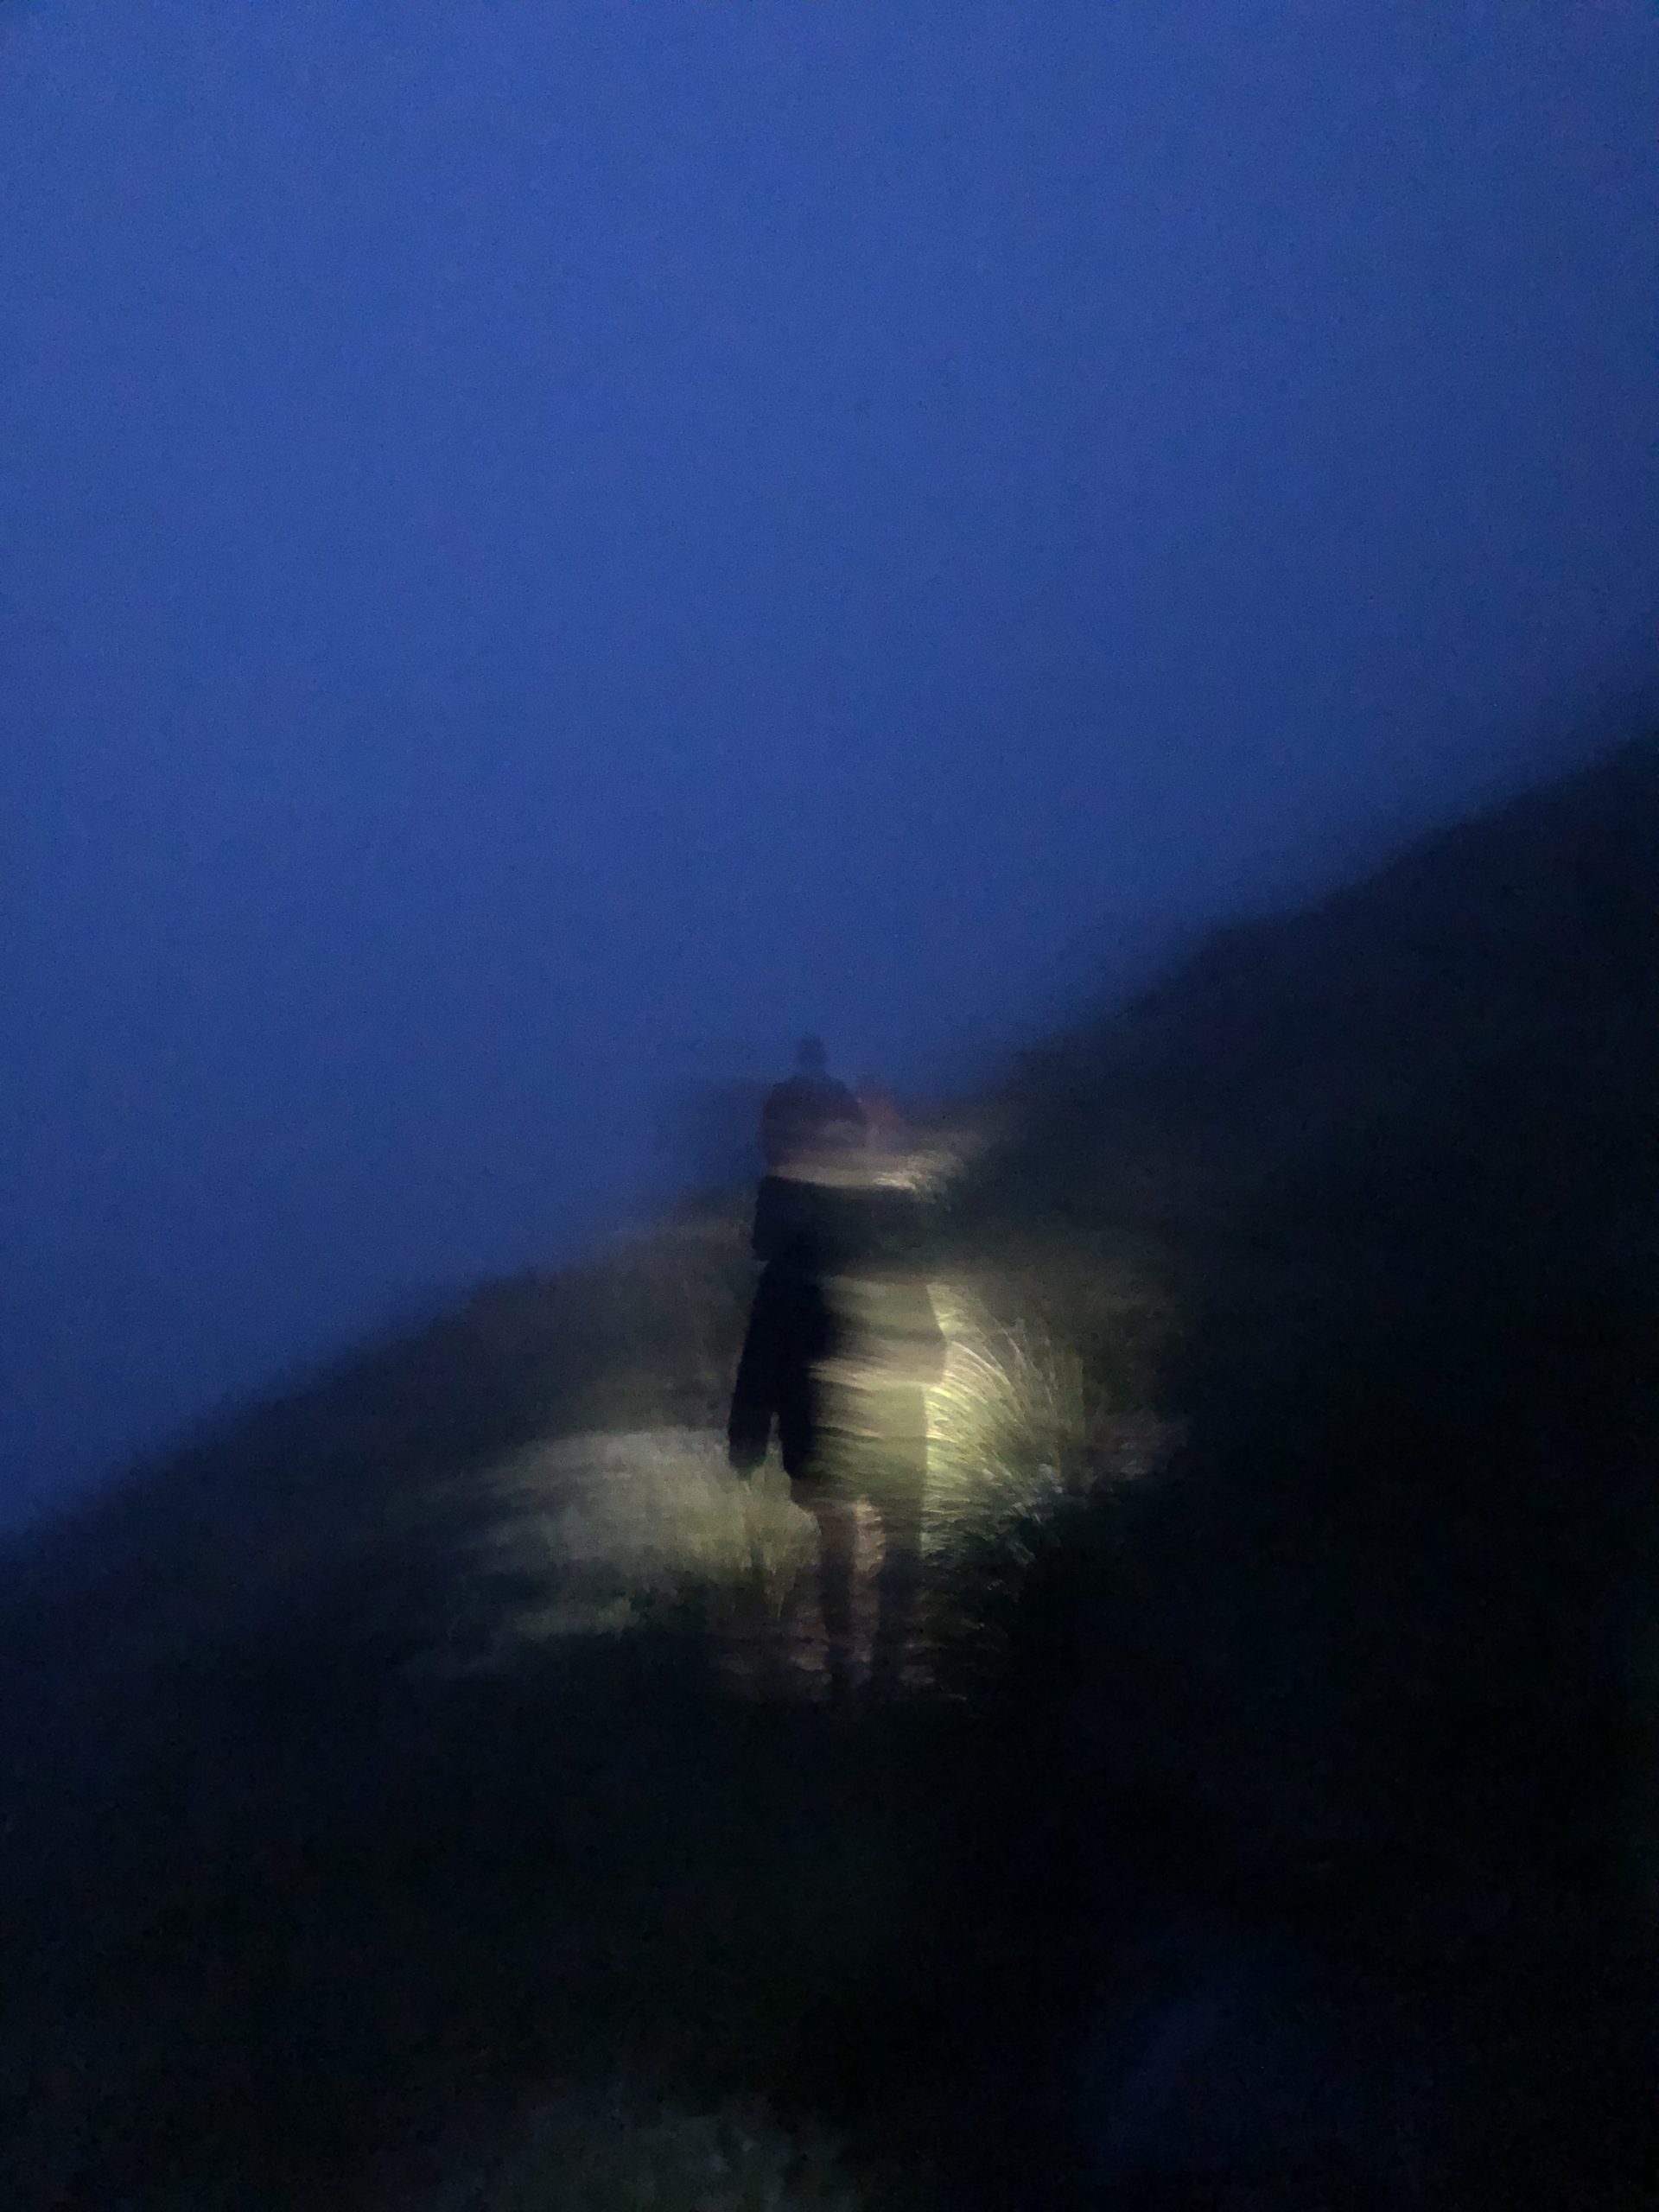 Fog, Fear, and Rescue: A Heroic Hiker's PLB Activation